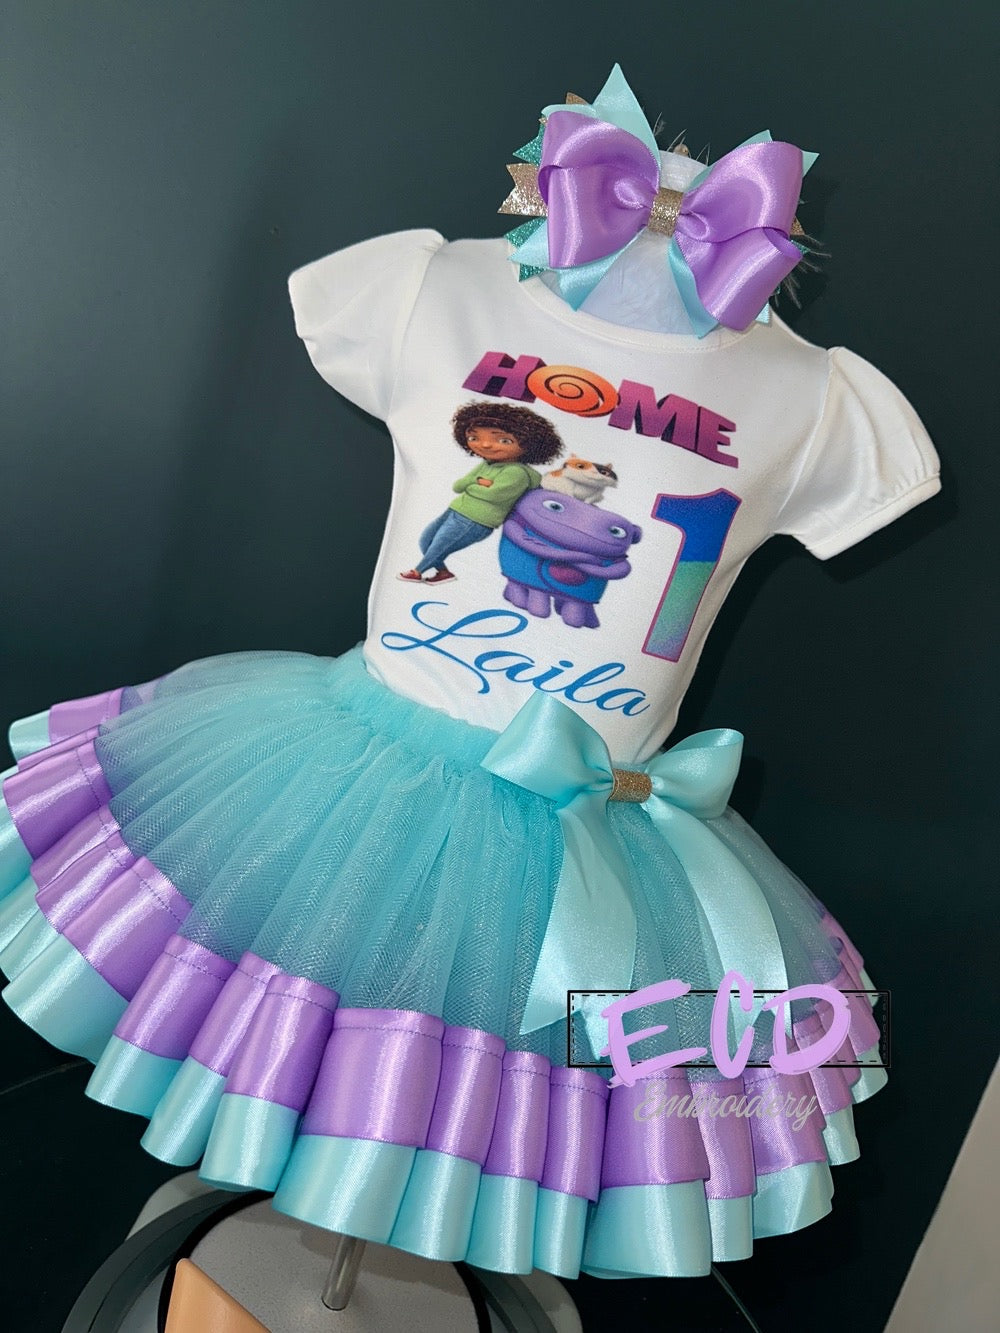 Dreamworks Home Birthday outfit